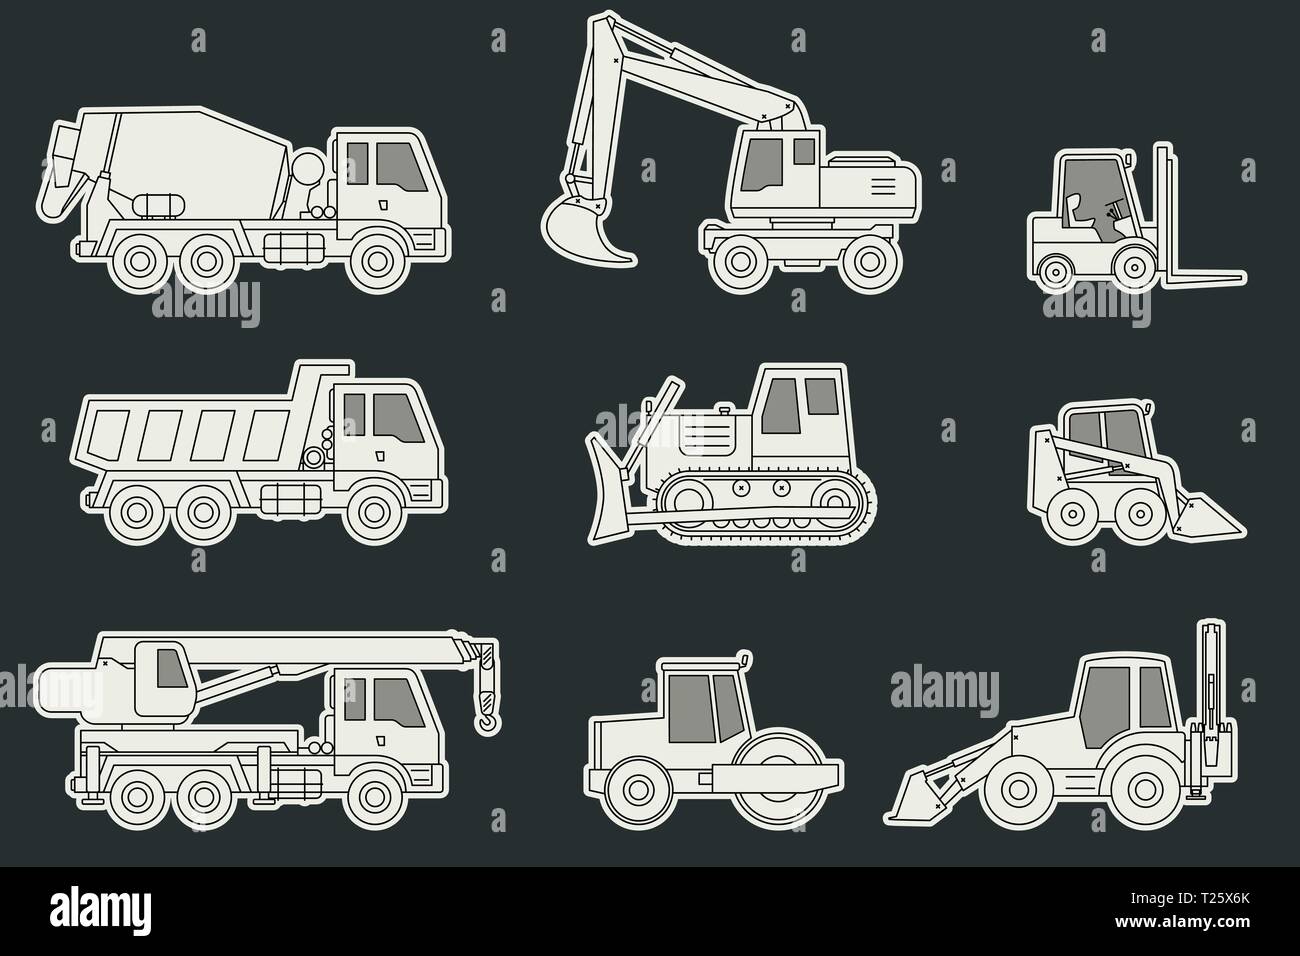 Construction machinery icons. Stock Vector